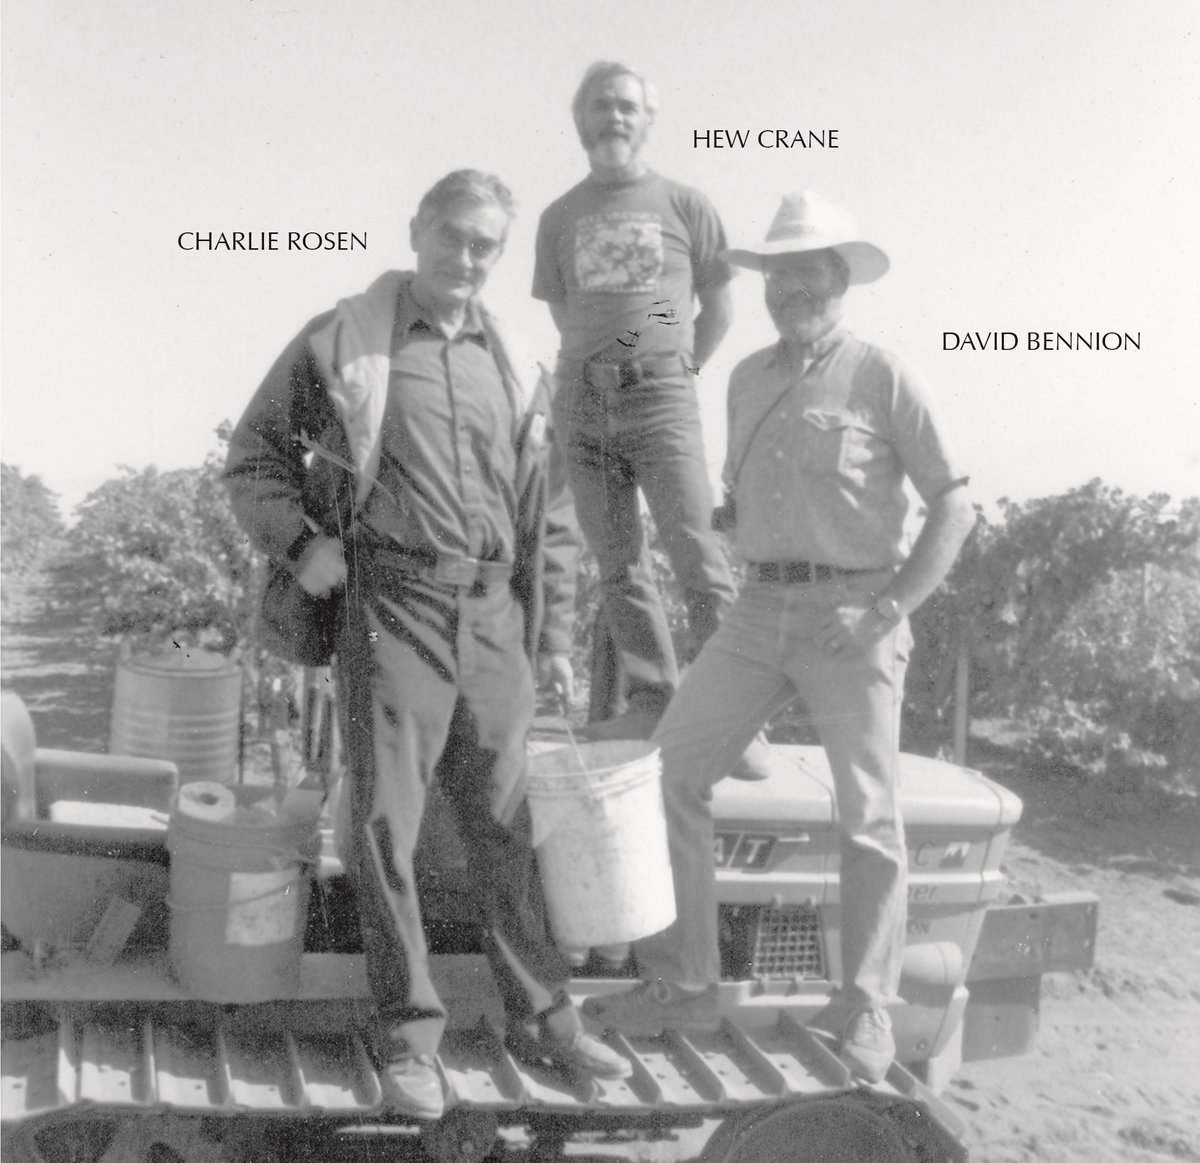 #ThrowbackThursday #MeetTheFounders

Ridge Vineyards was founded in 1962 as a partnership by four Stanford Research Institute engineers; Dave Bennion, Hew Crane, Charlie Rosen, and Howard Ziedler.

#Ridge60 #Since1962